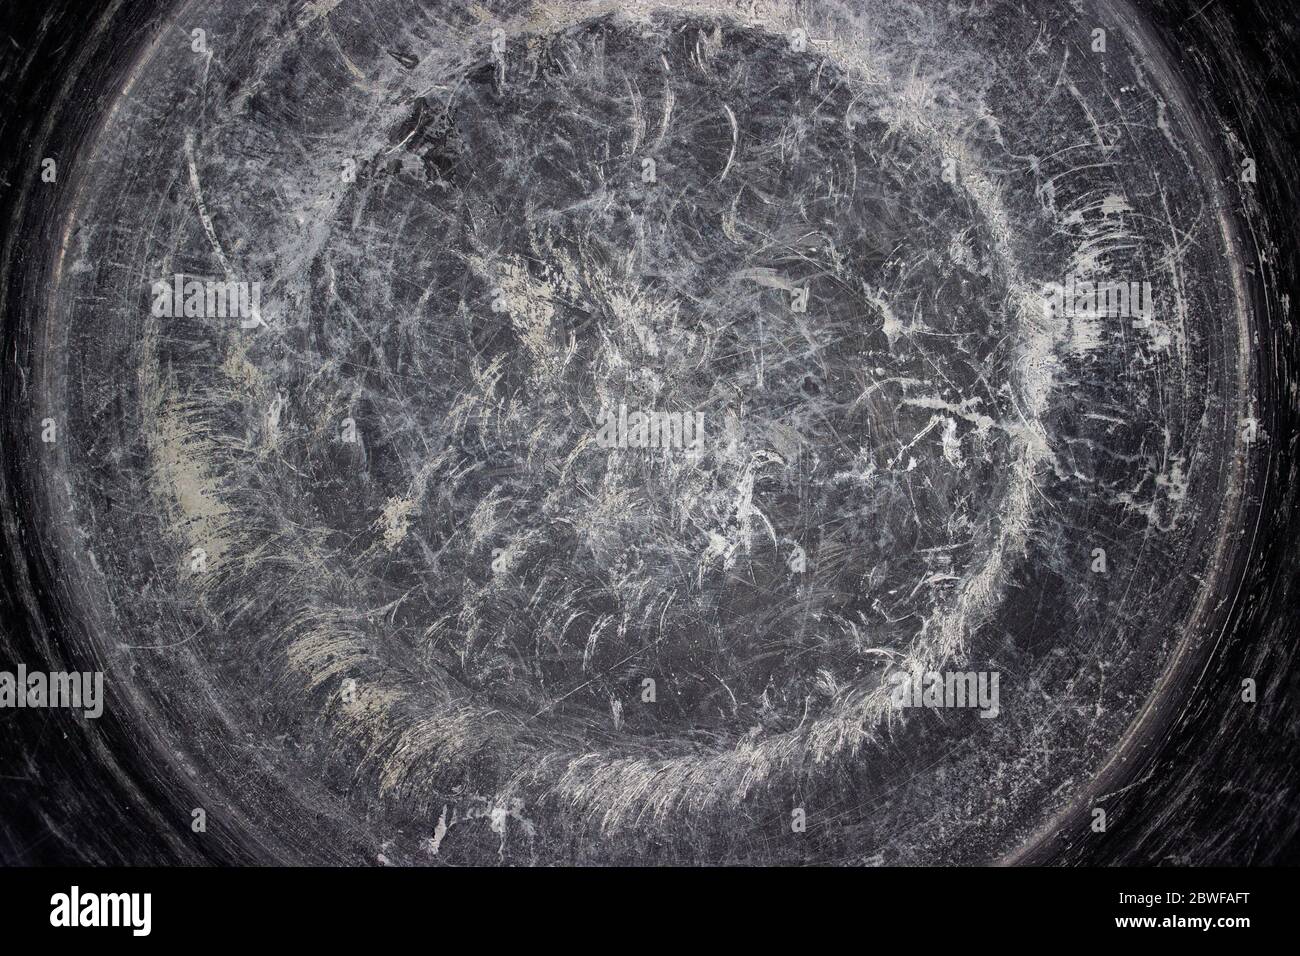 Circular brushed metal background. Distressed overlay texture of rusted peeled metal. Grey concrete texture with scratches, micro cracks. Grunge dust Stock Photo